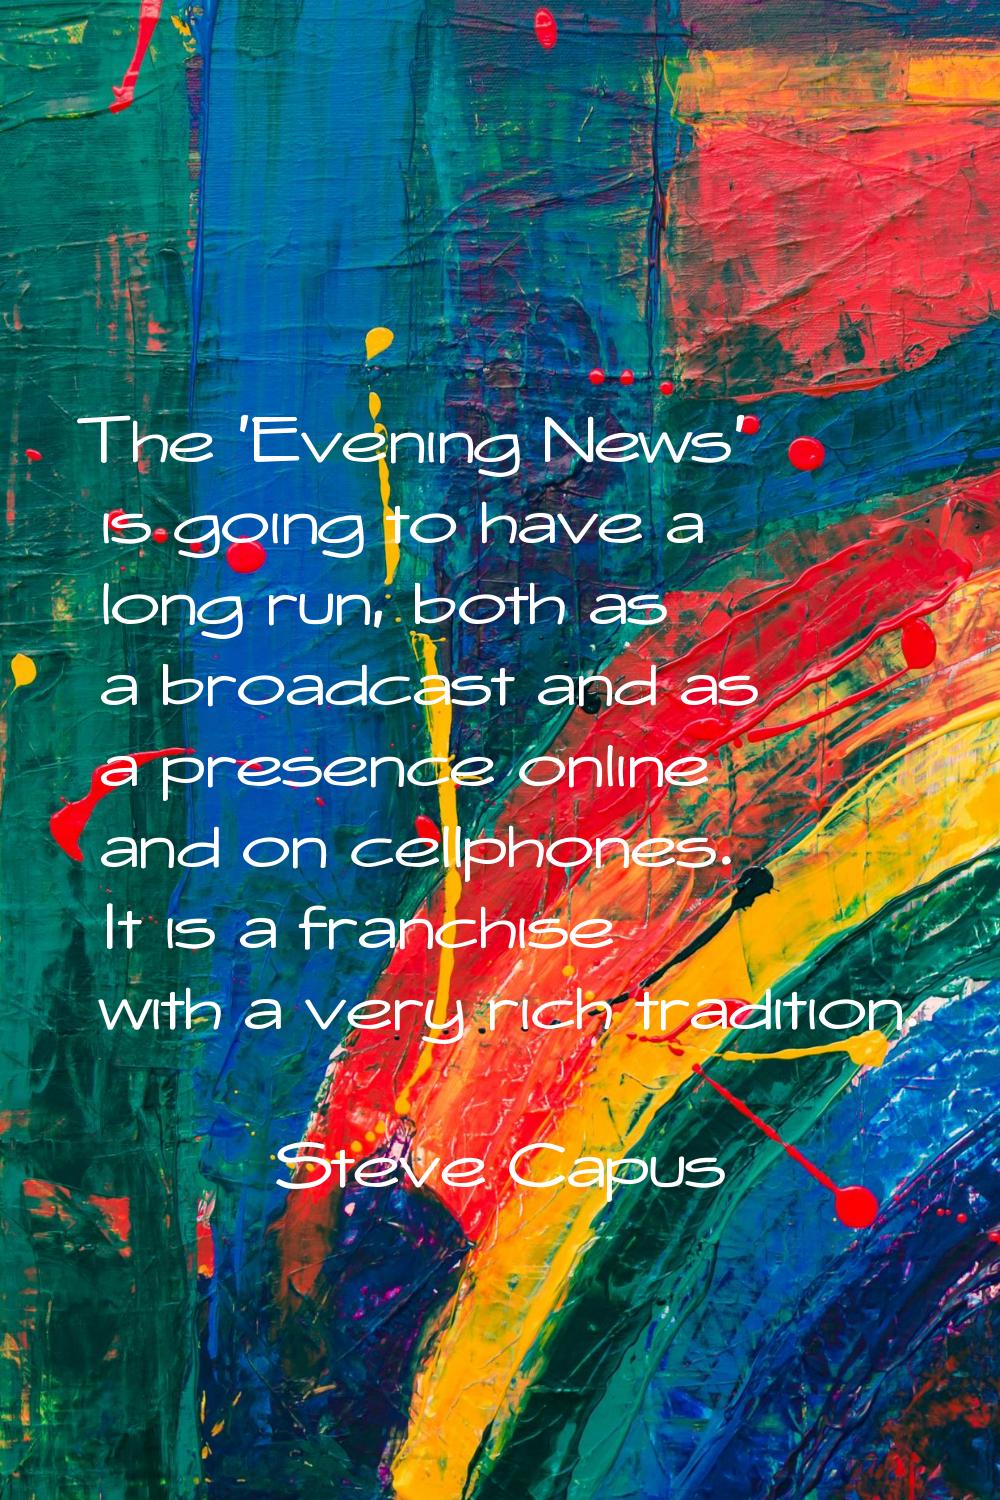 The 'Evening News' is going to have a long run, both as a broadcast and as a presence online and on